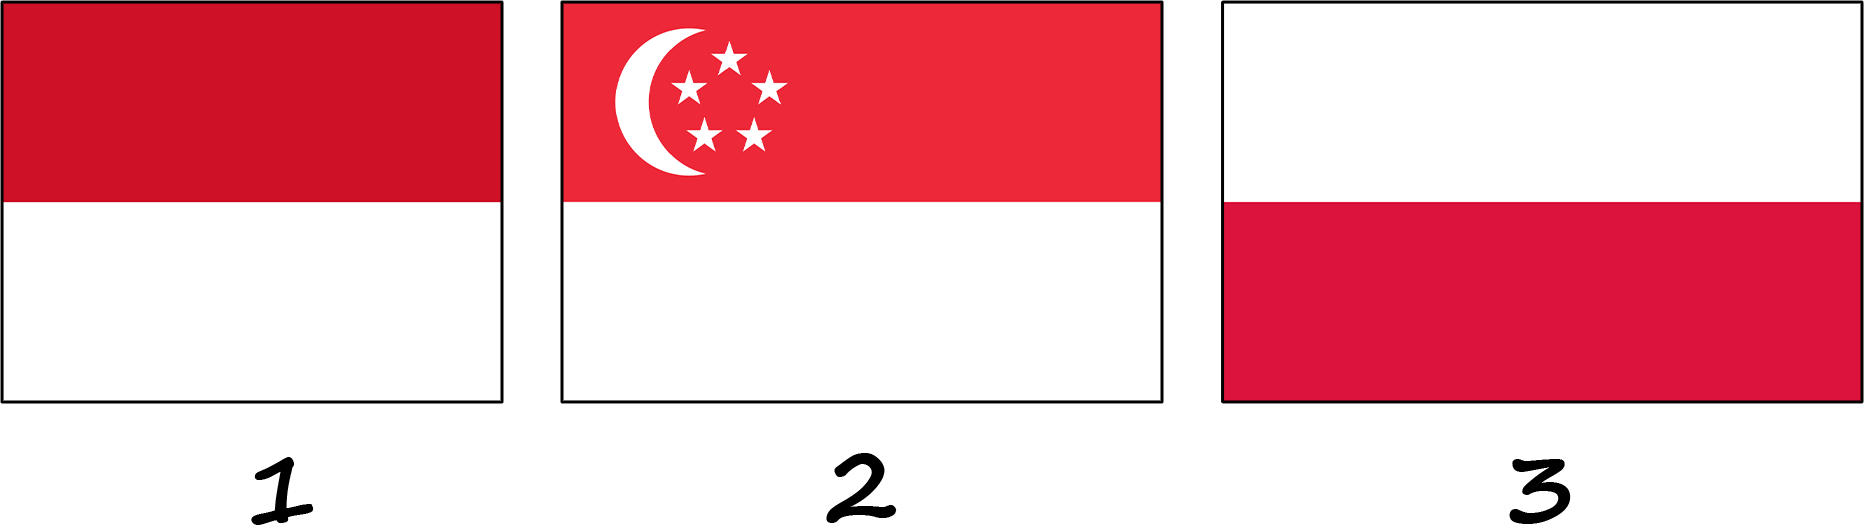 What flags are similar to the red and white flag of Indonesia?